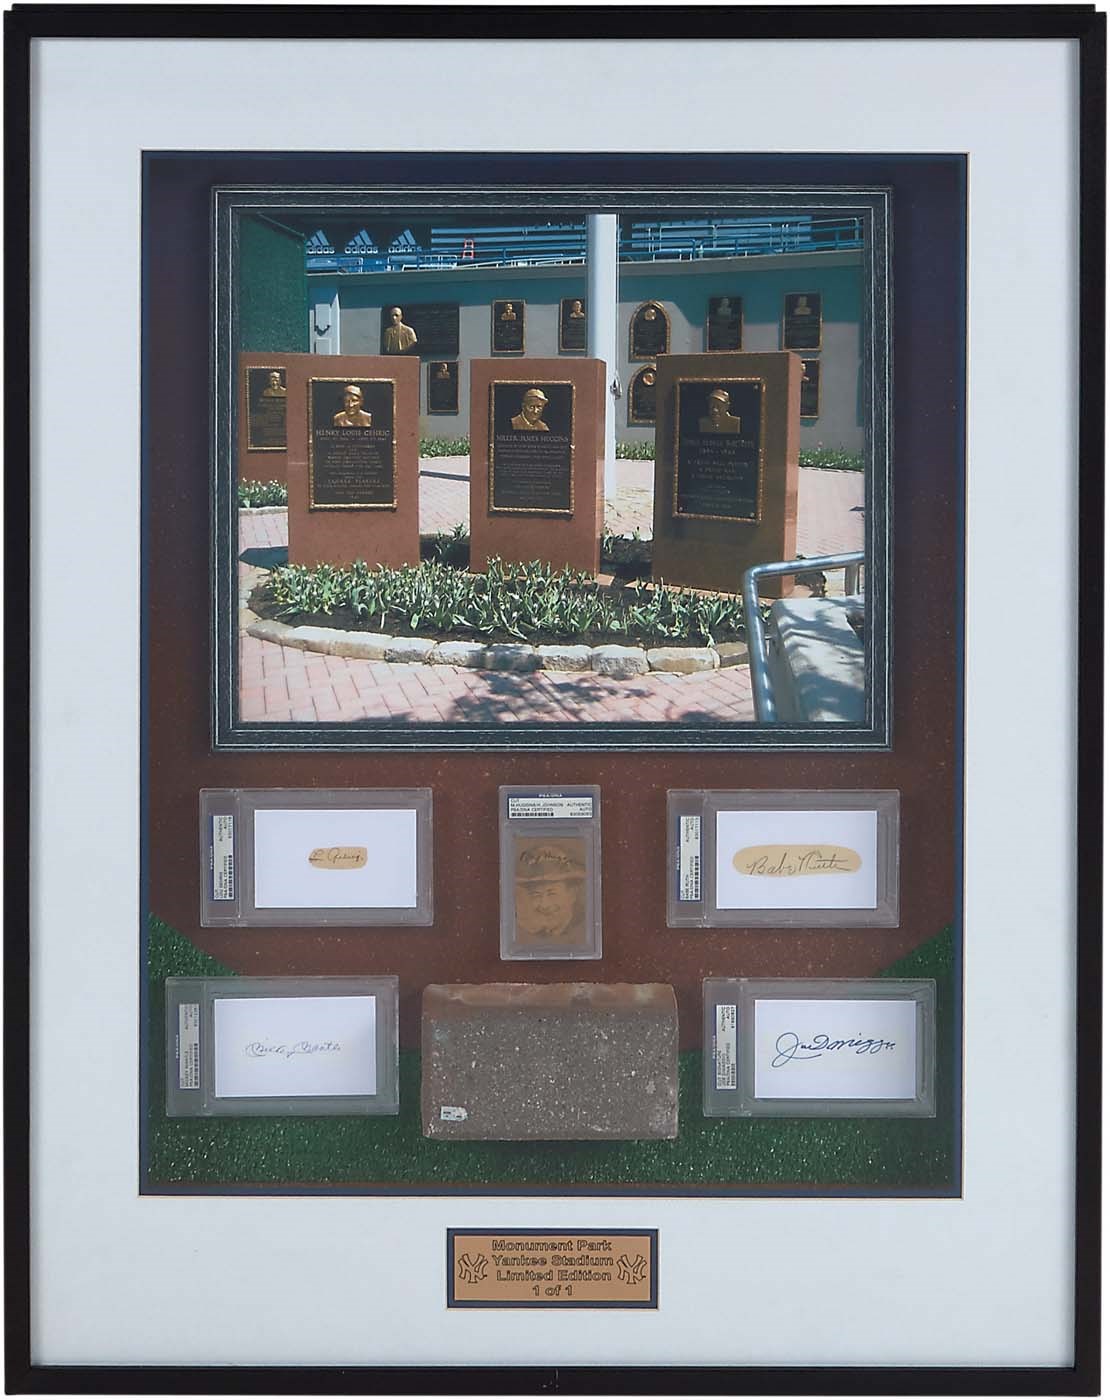 NY Yankees, Giants & Mets - Yankee Legends "1 of 1" Signed Monument Park Display w/Ruth & Gehrig (PSA)